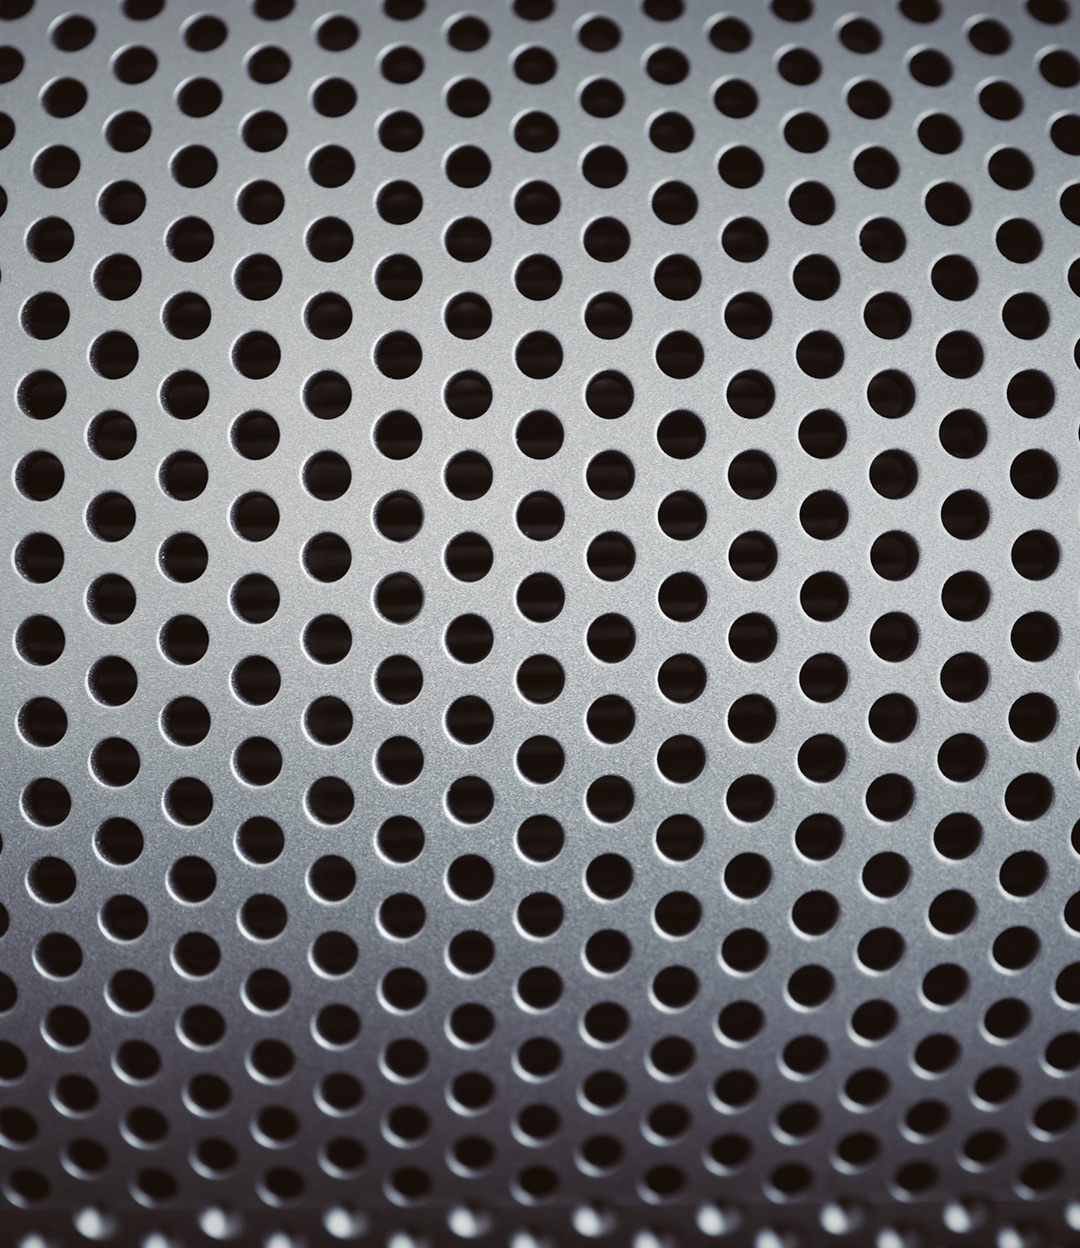 Close up image of drill holes in a metal sheet